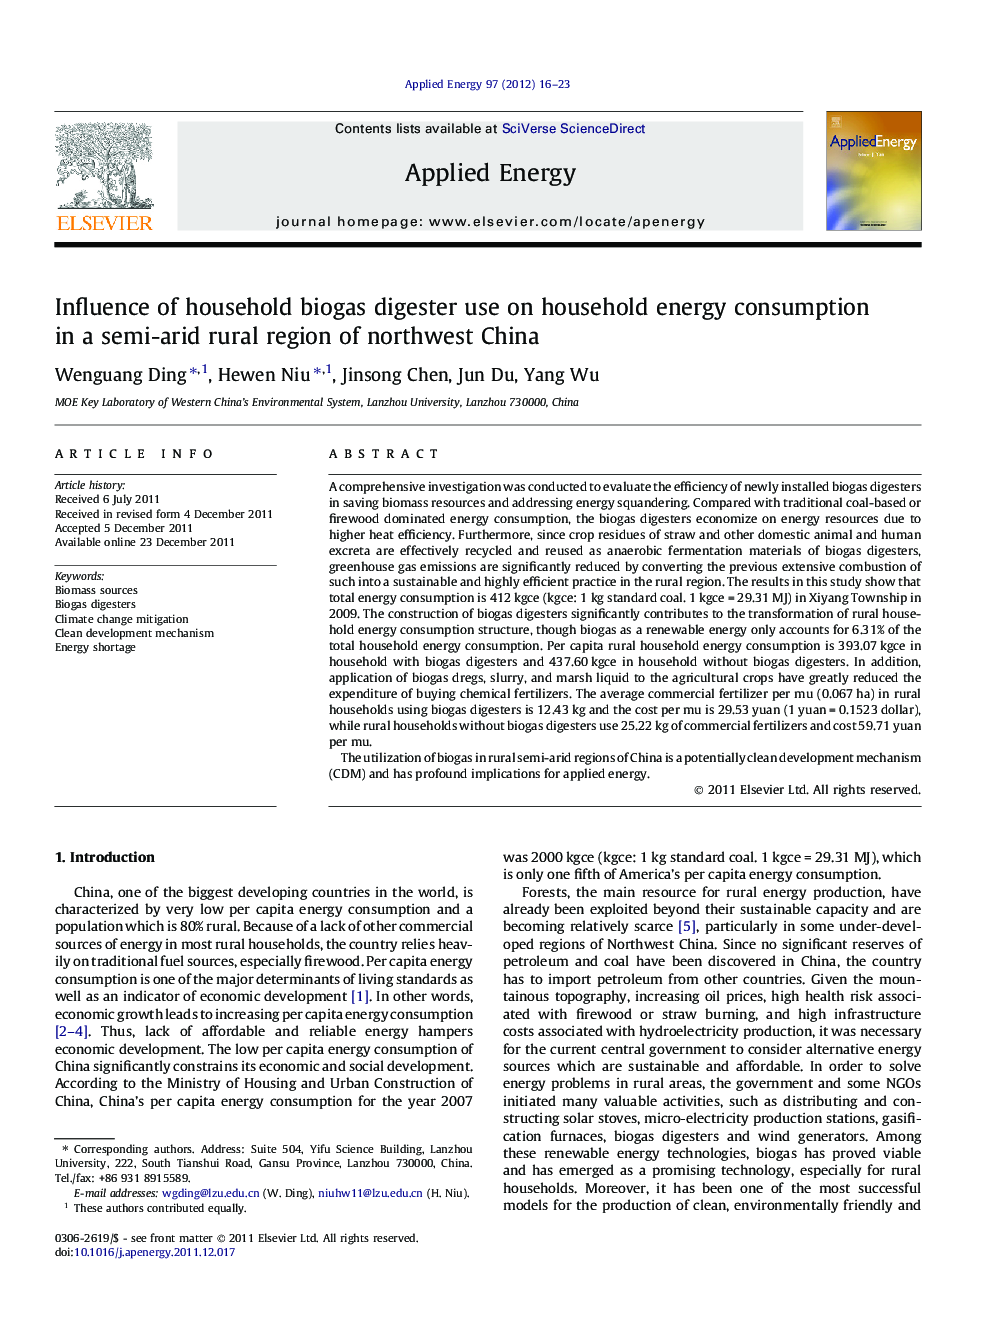 Influence of household biogas digester use on household energy consumption in a semi-arid rural region of northwest China